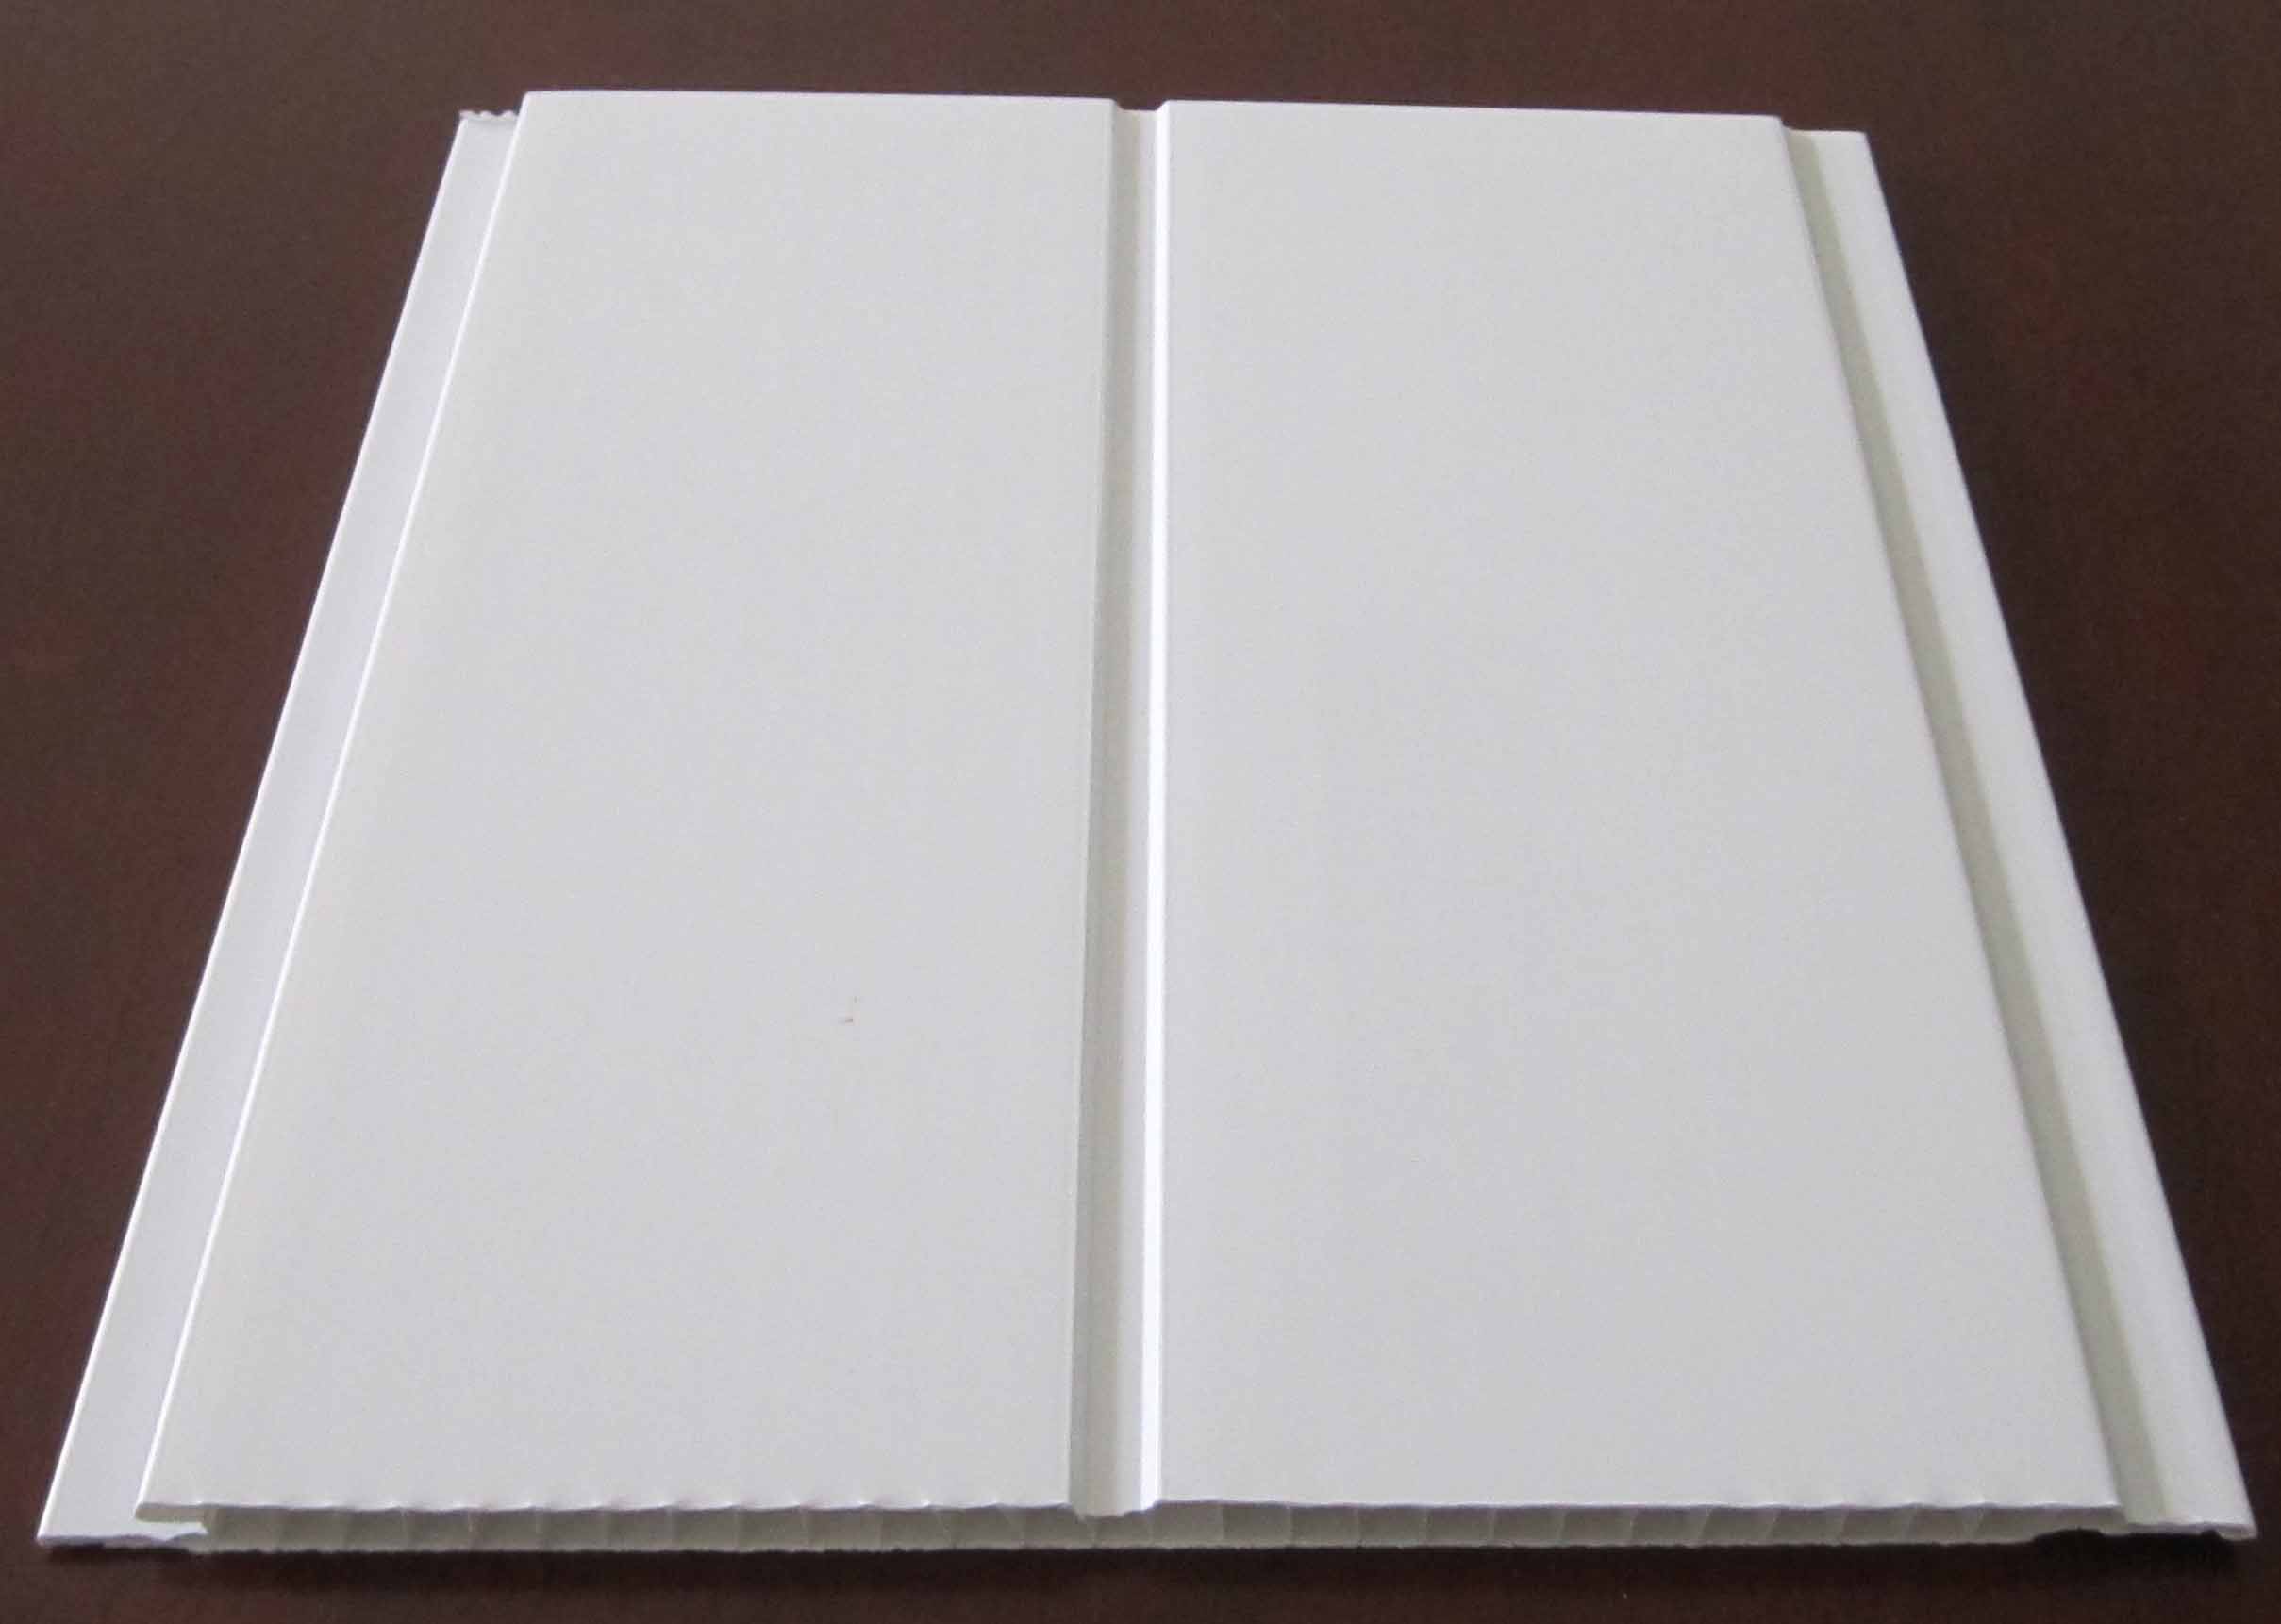 Pvc Ceiling Panel Manufacturer in China by Sinoceiling ...